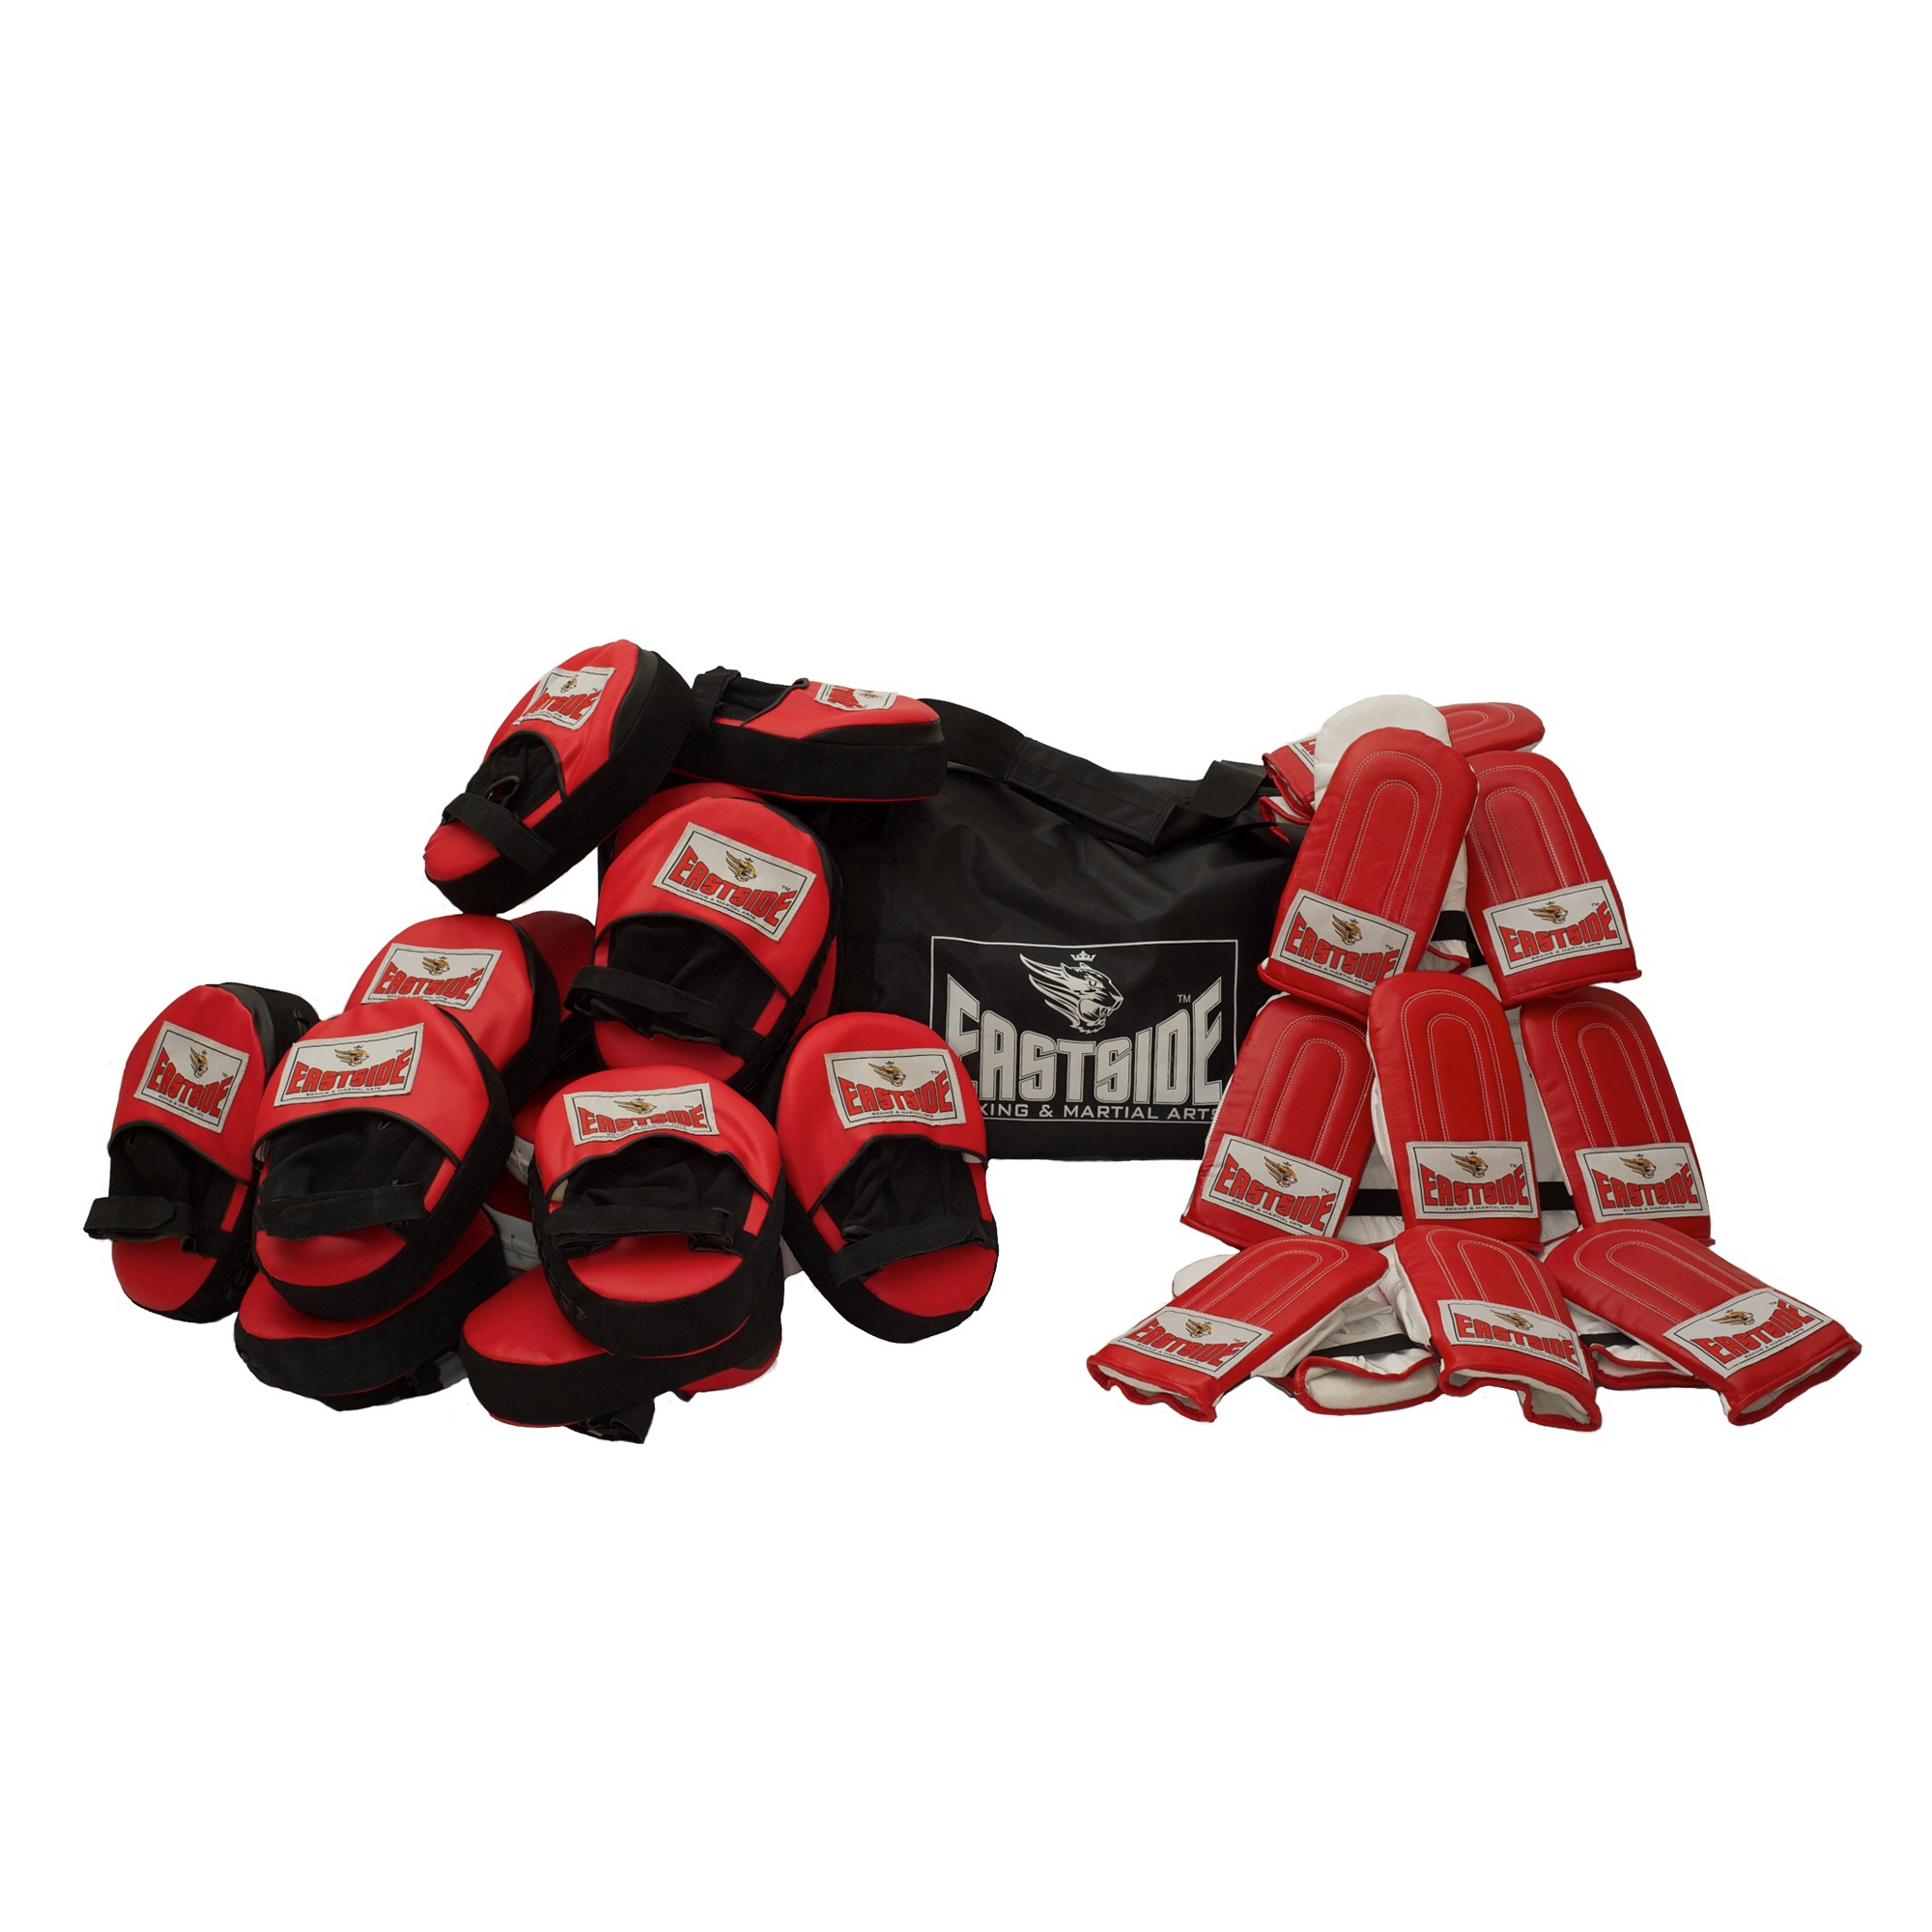 Eastiside Boxing Performance Group Set